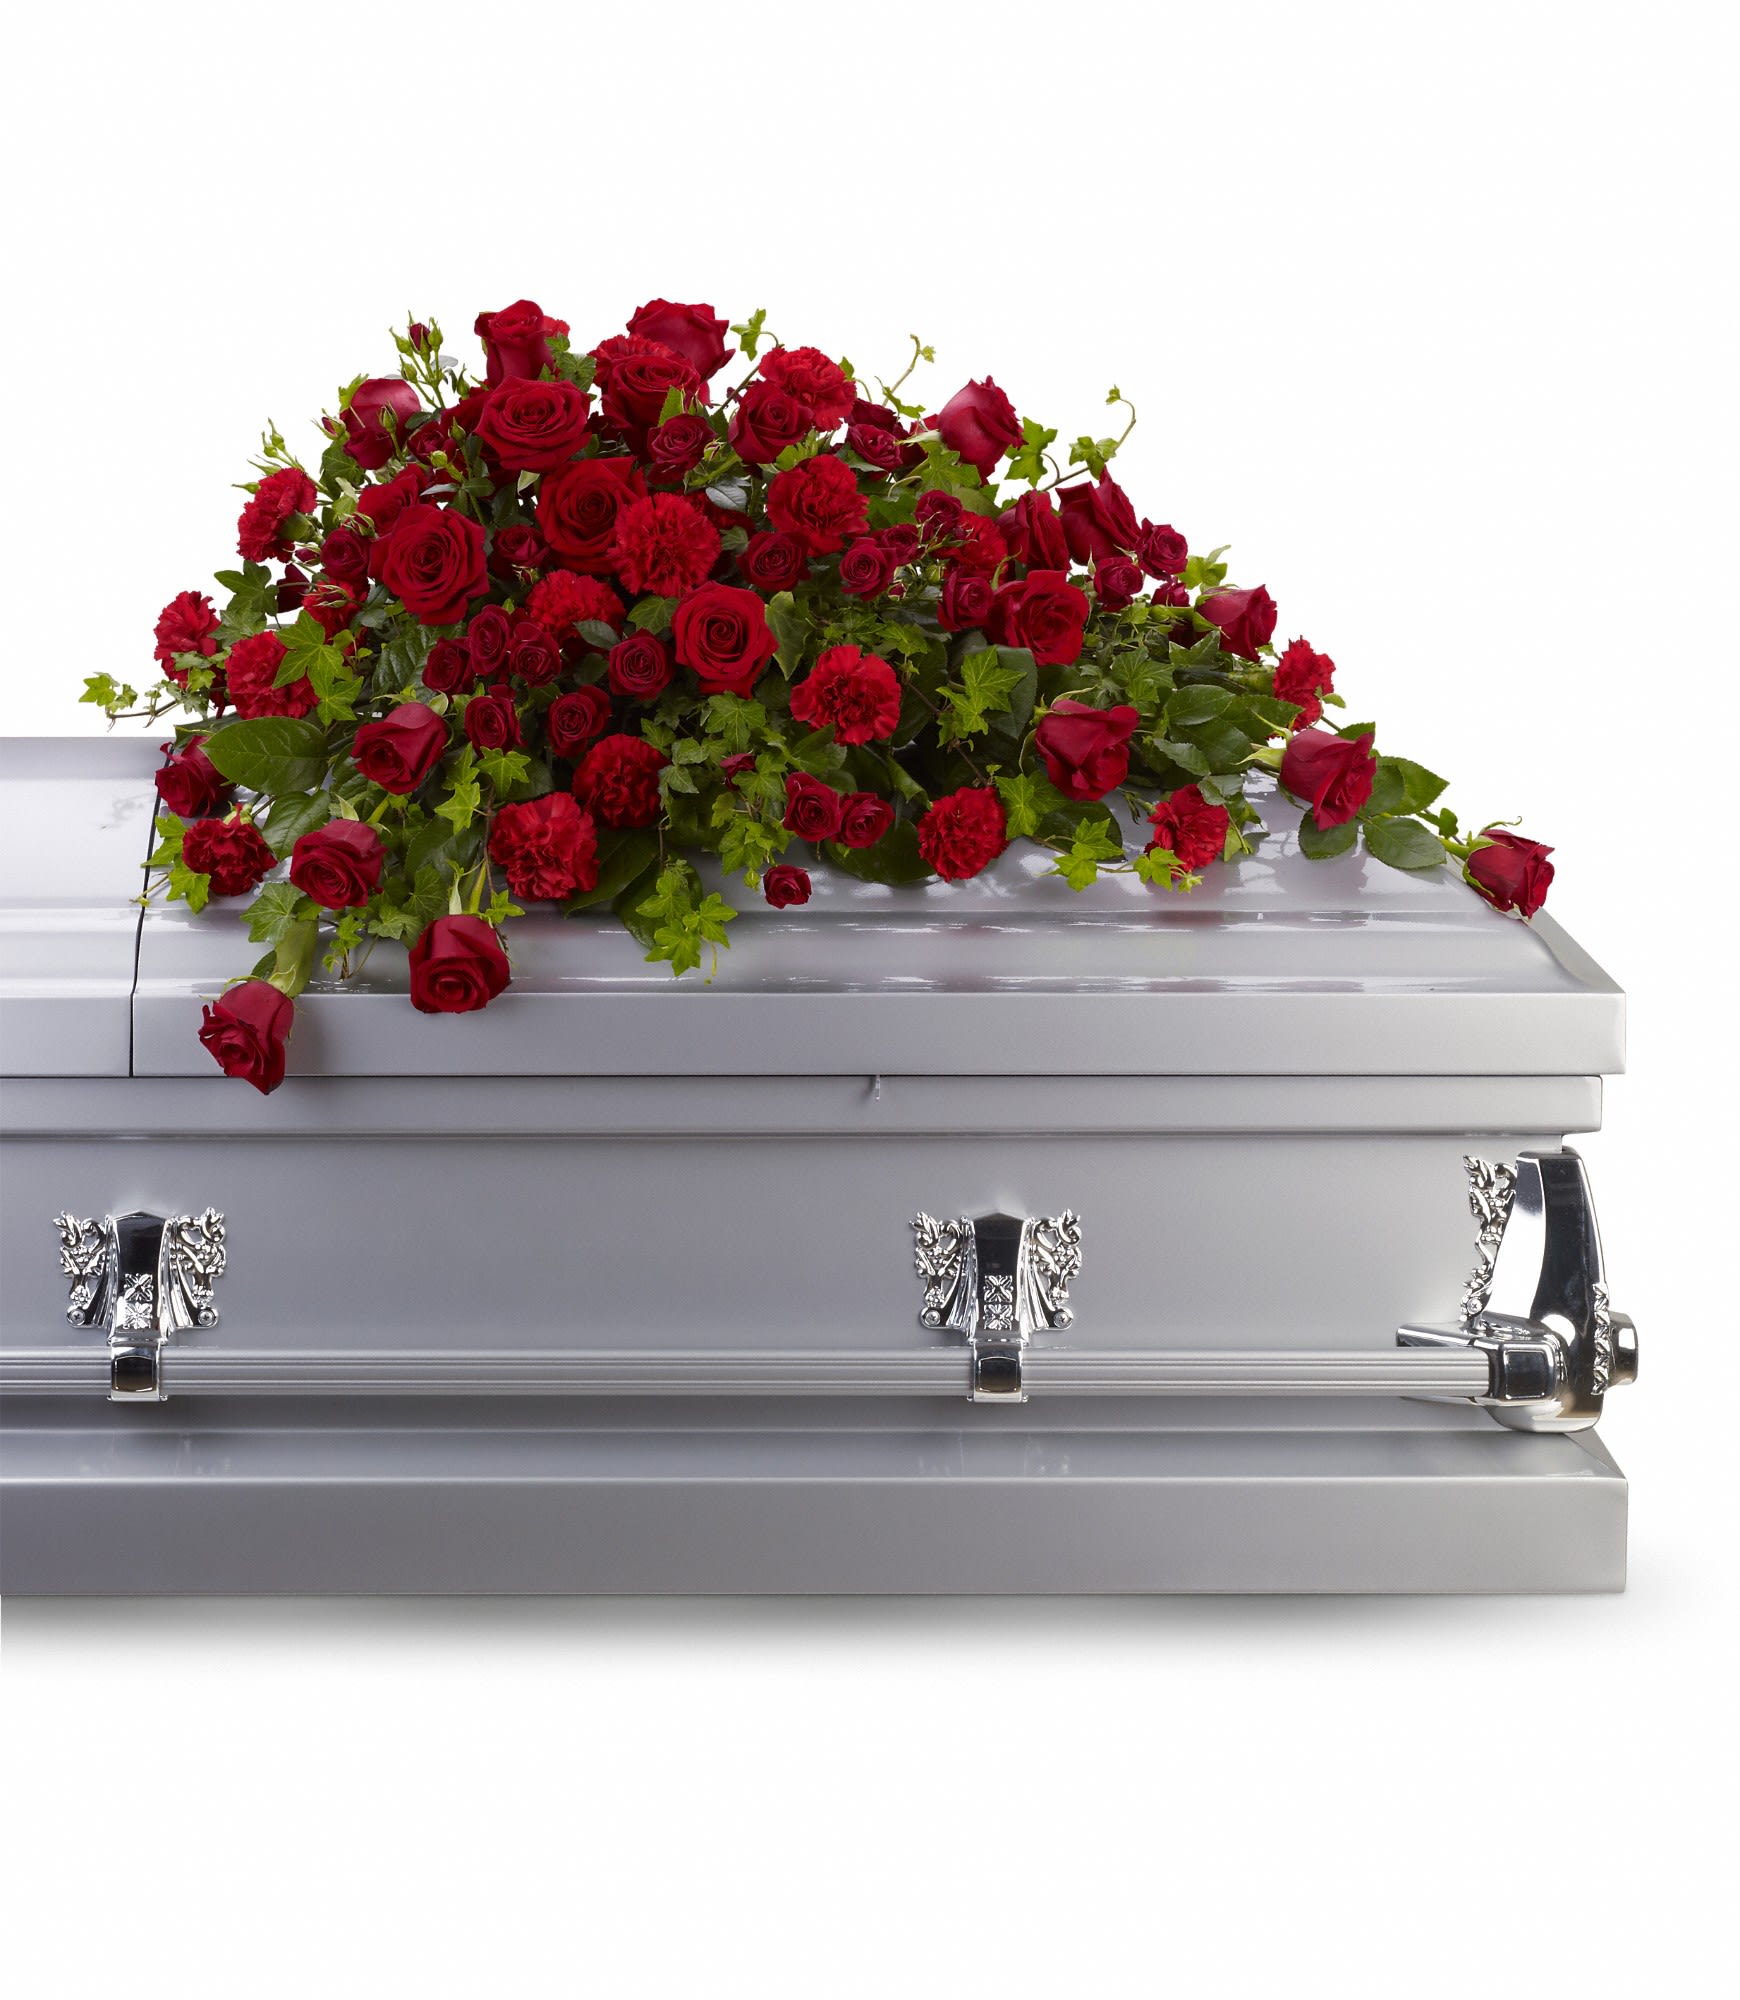 Red Rose Reverence Casket Spray - Red roses tell a story of love, beauty, and strength. This all-red spray graces the casket with accents of trailing ivy.  